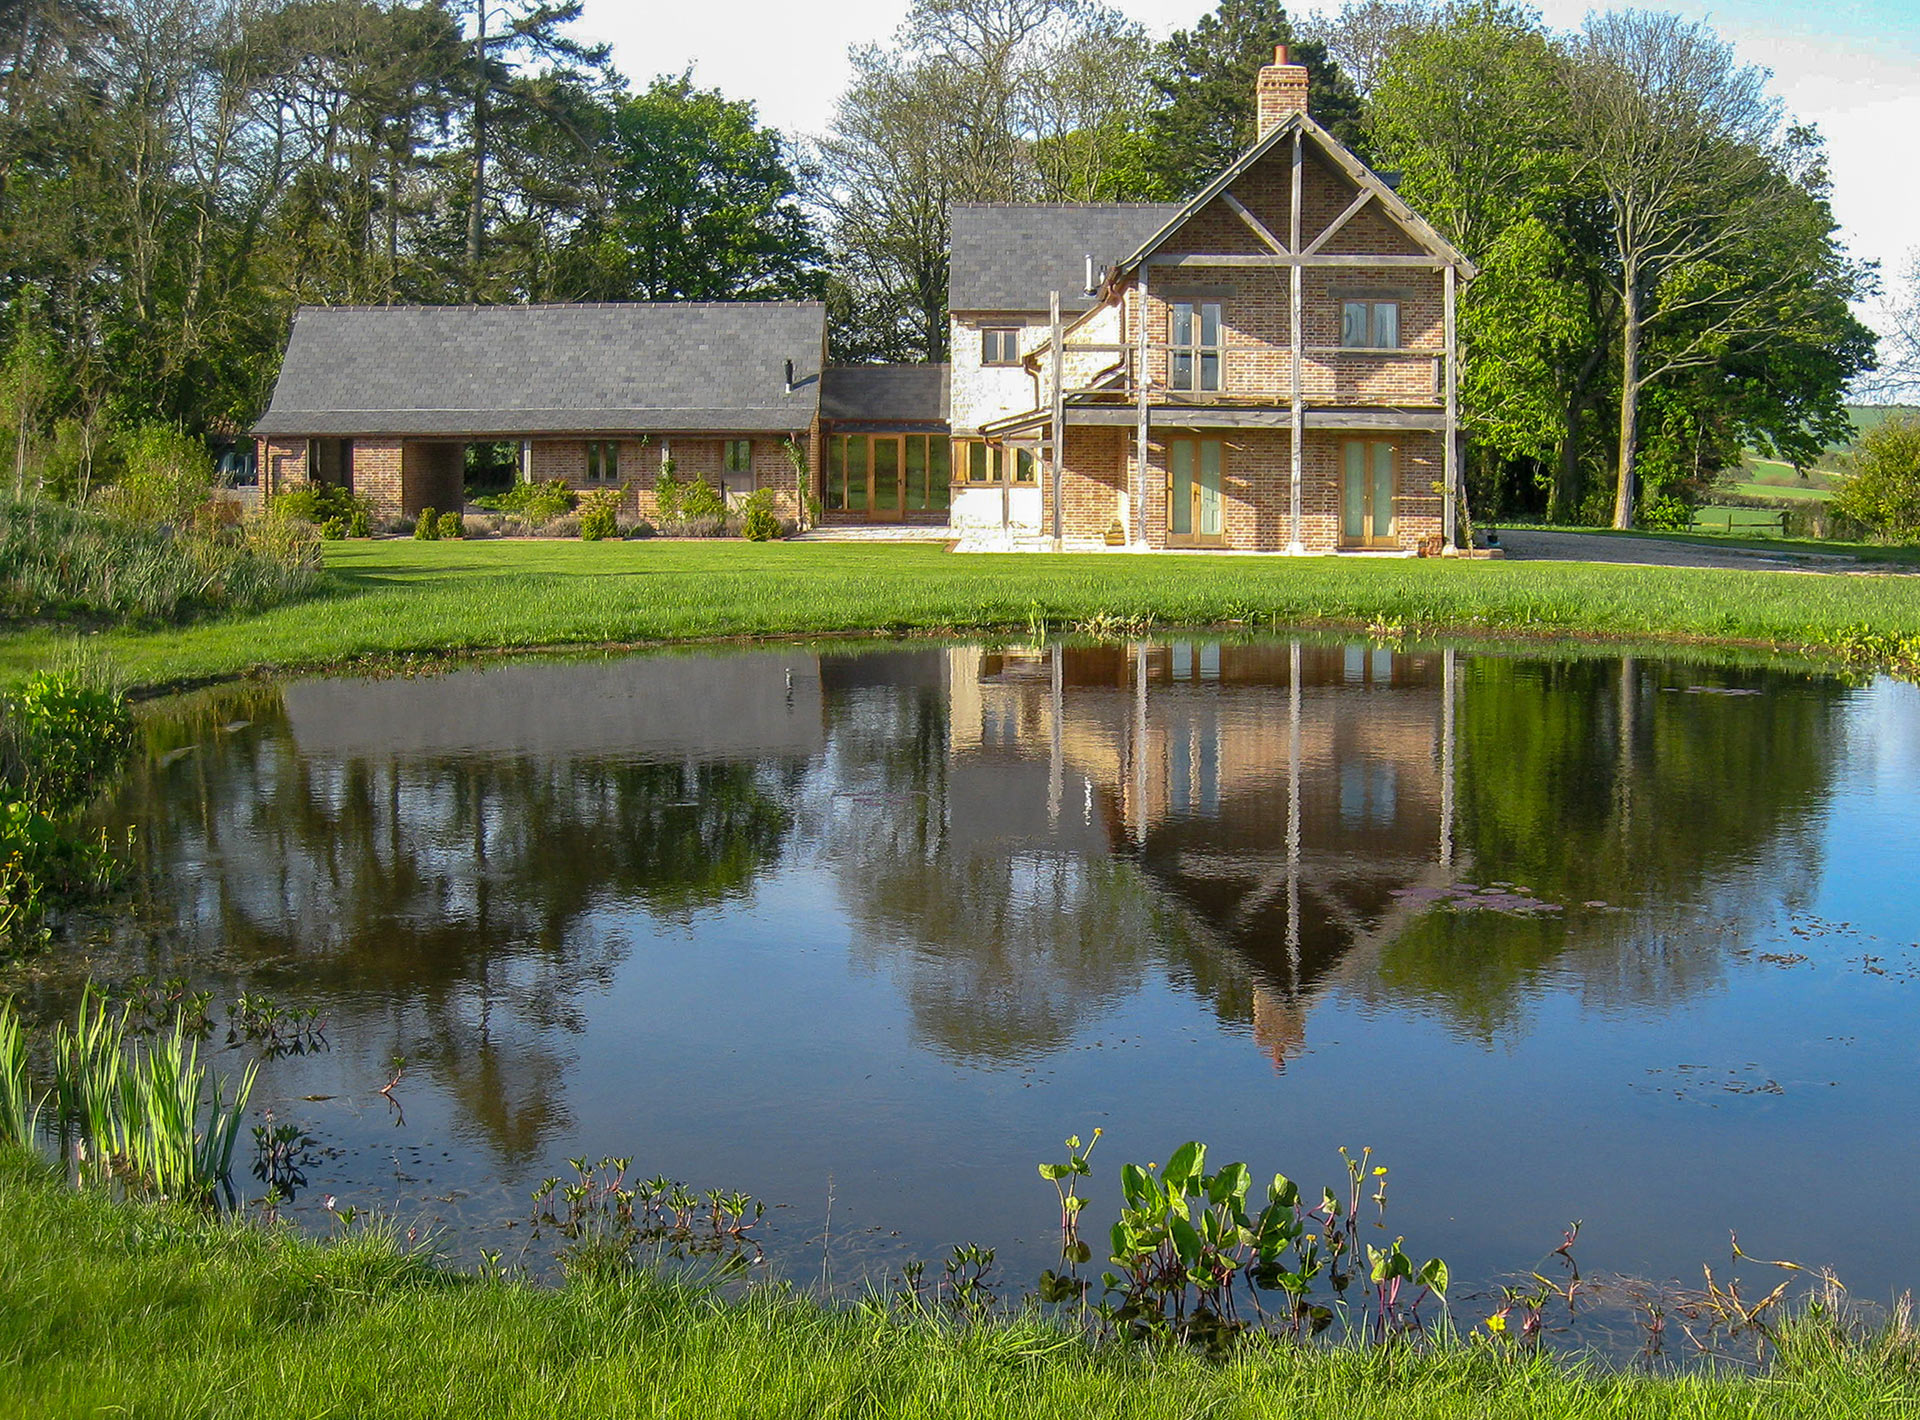 beautiful red brick and stone house with gable end overlooking a large pond and grass lawn